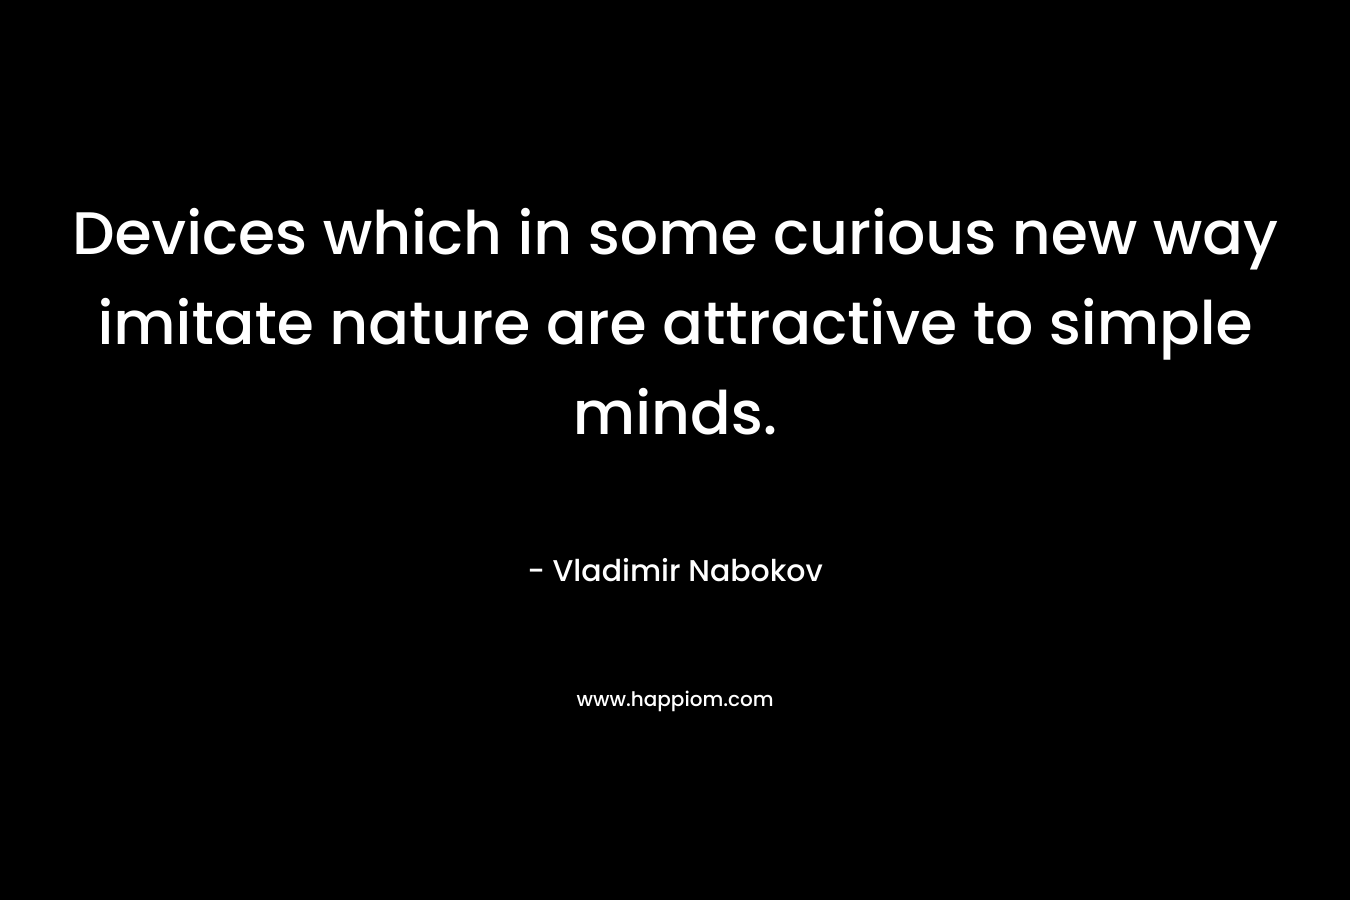 Devices which in some curious new way imitate nature are attractive to simple minds.